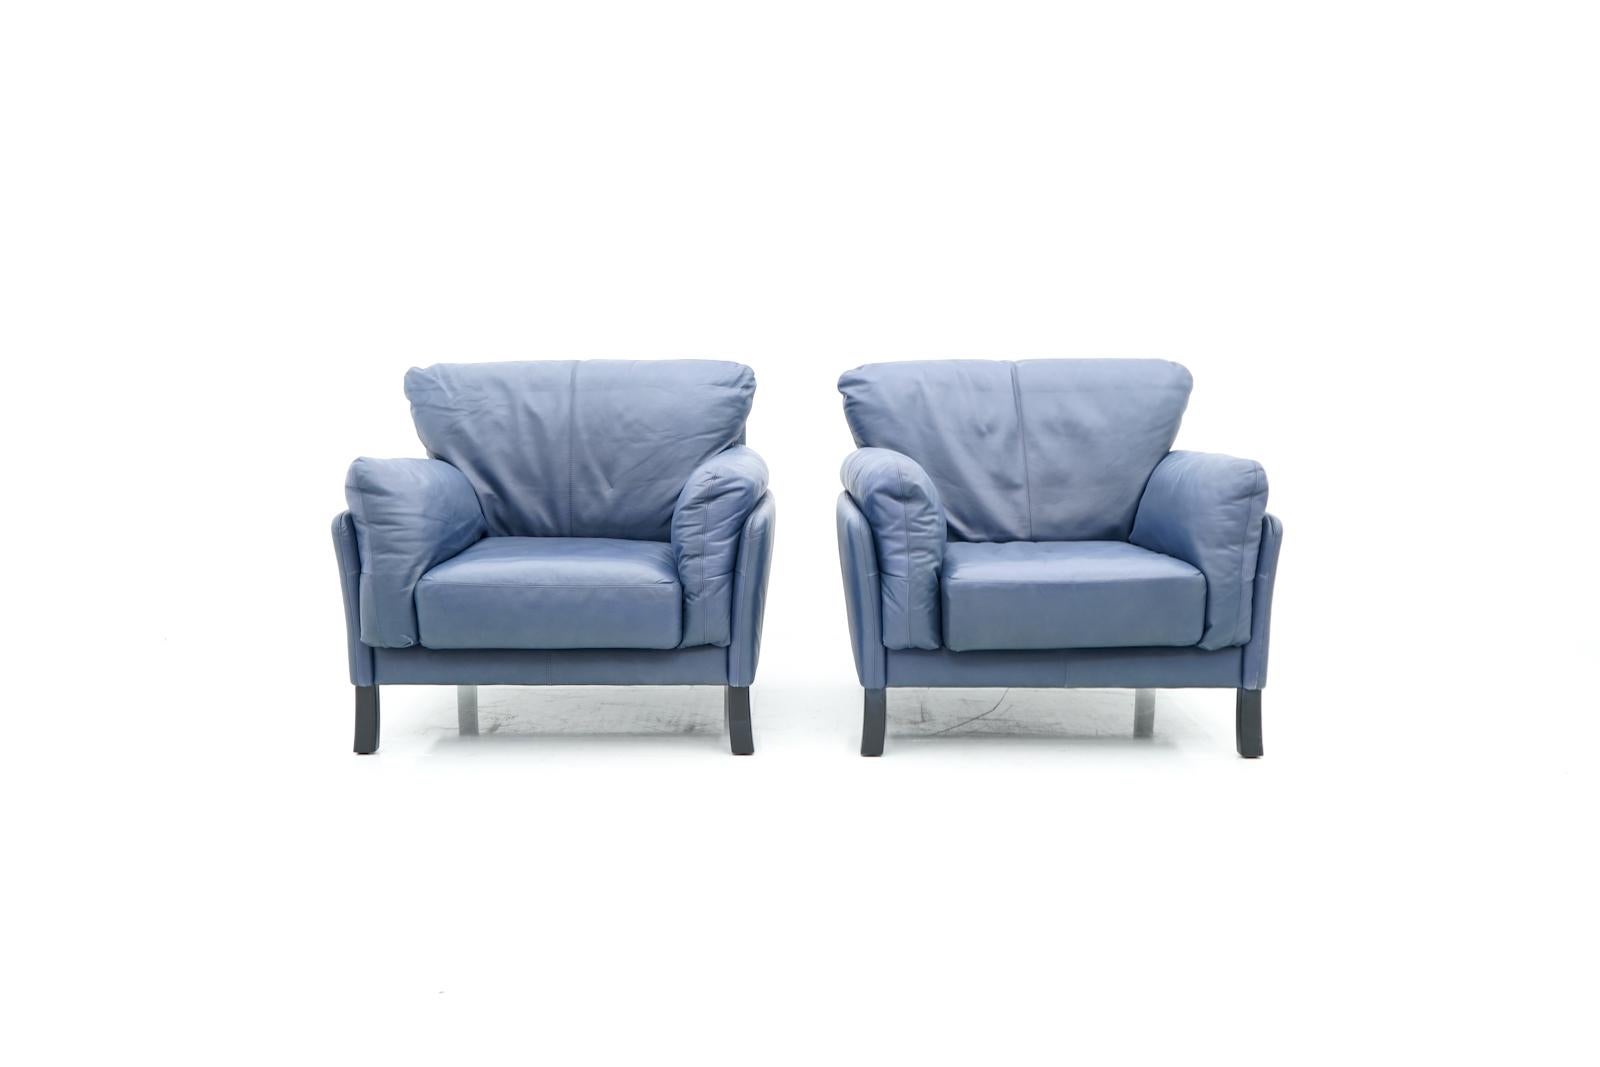 Pair of ultra comfortable lounge chairs by Dreipunkt International in blue leather and black wood legs. Very good condition


We also have the matching three seat sofa in stock.